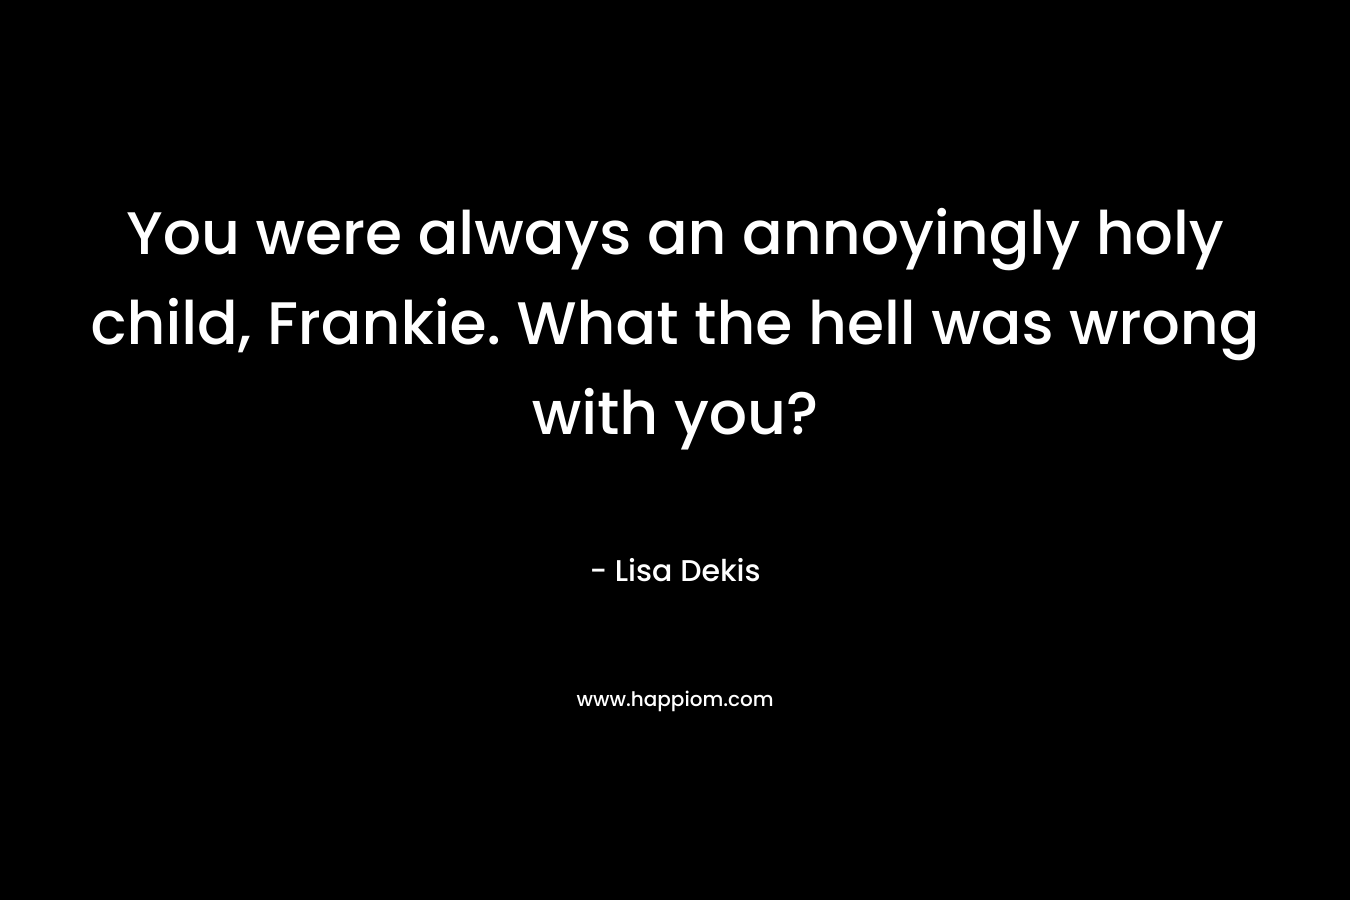 You were always an annoyingly holy child, Frankie. What the hell was wrong with you?